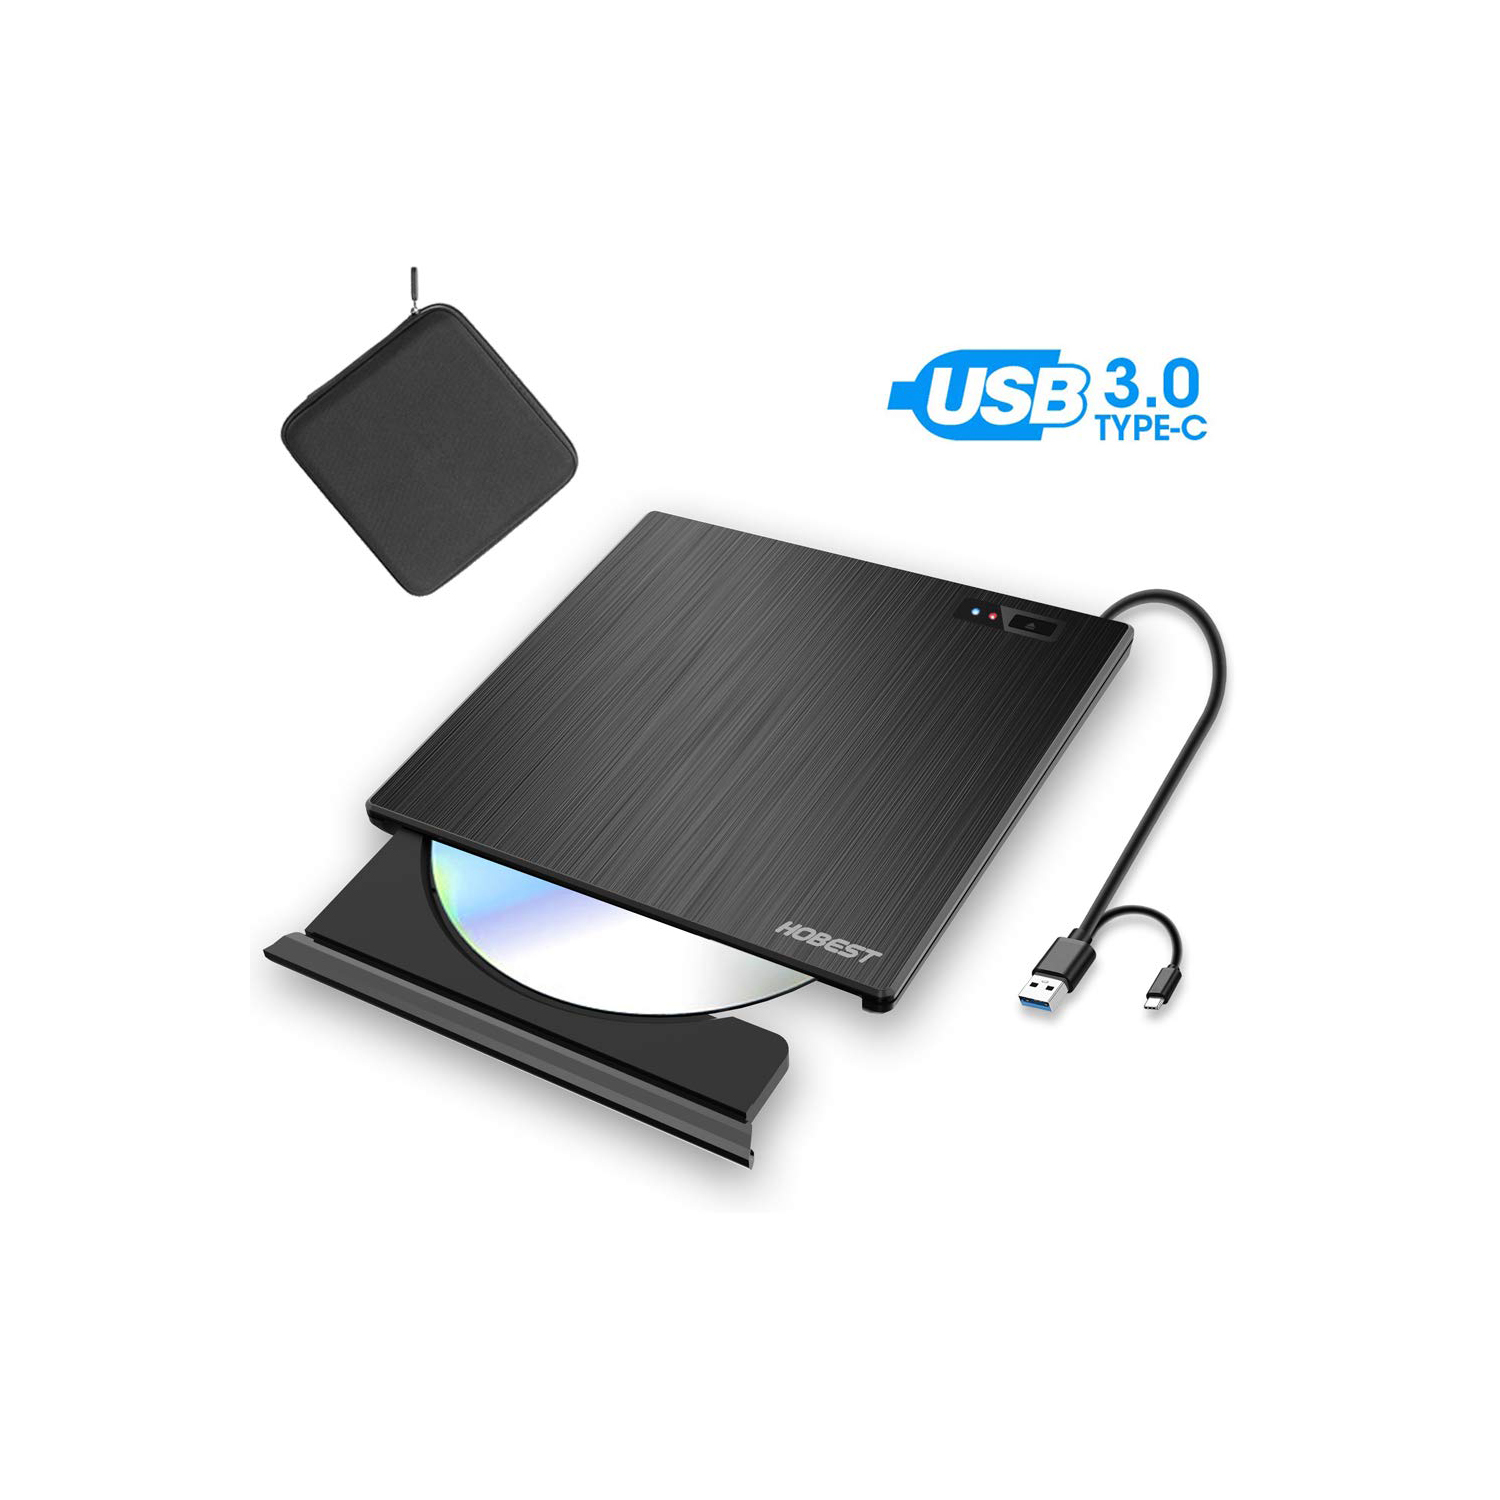 DVD Drive - USB 3.0 and Type-C | Advantage Software